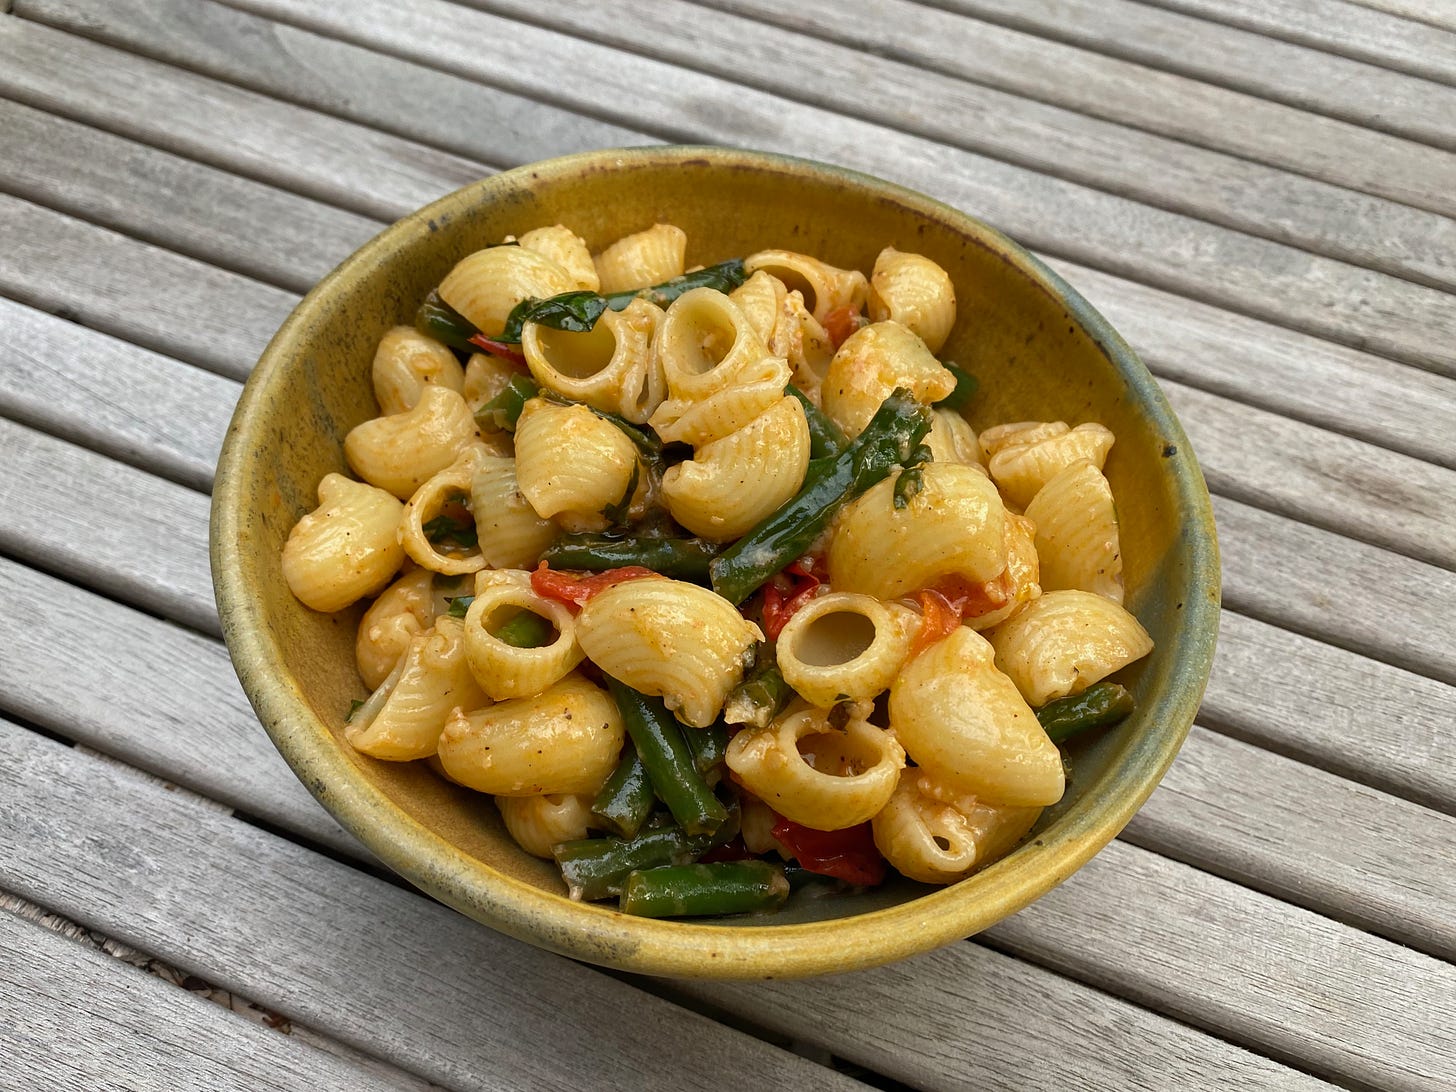 A ceramic bowl of creamy pasta, roasted green beans, and flecks of red tomatoes on a porch table.